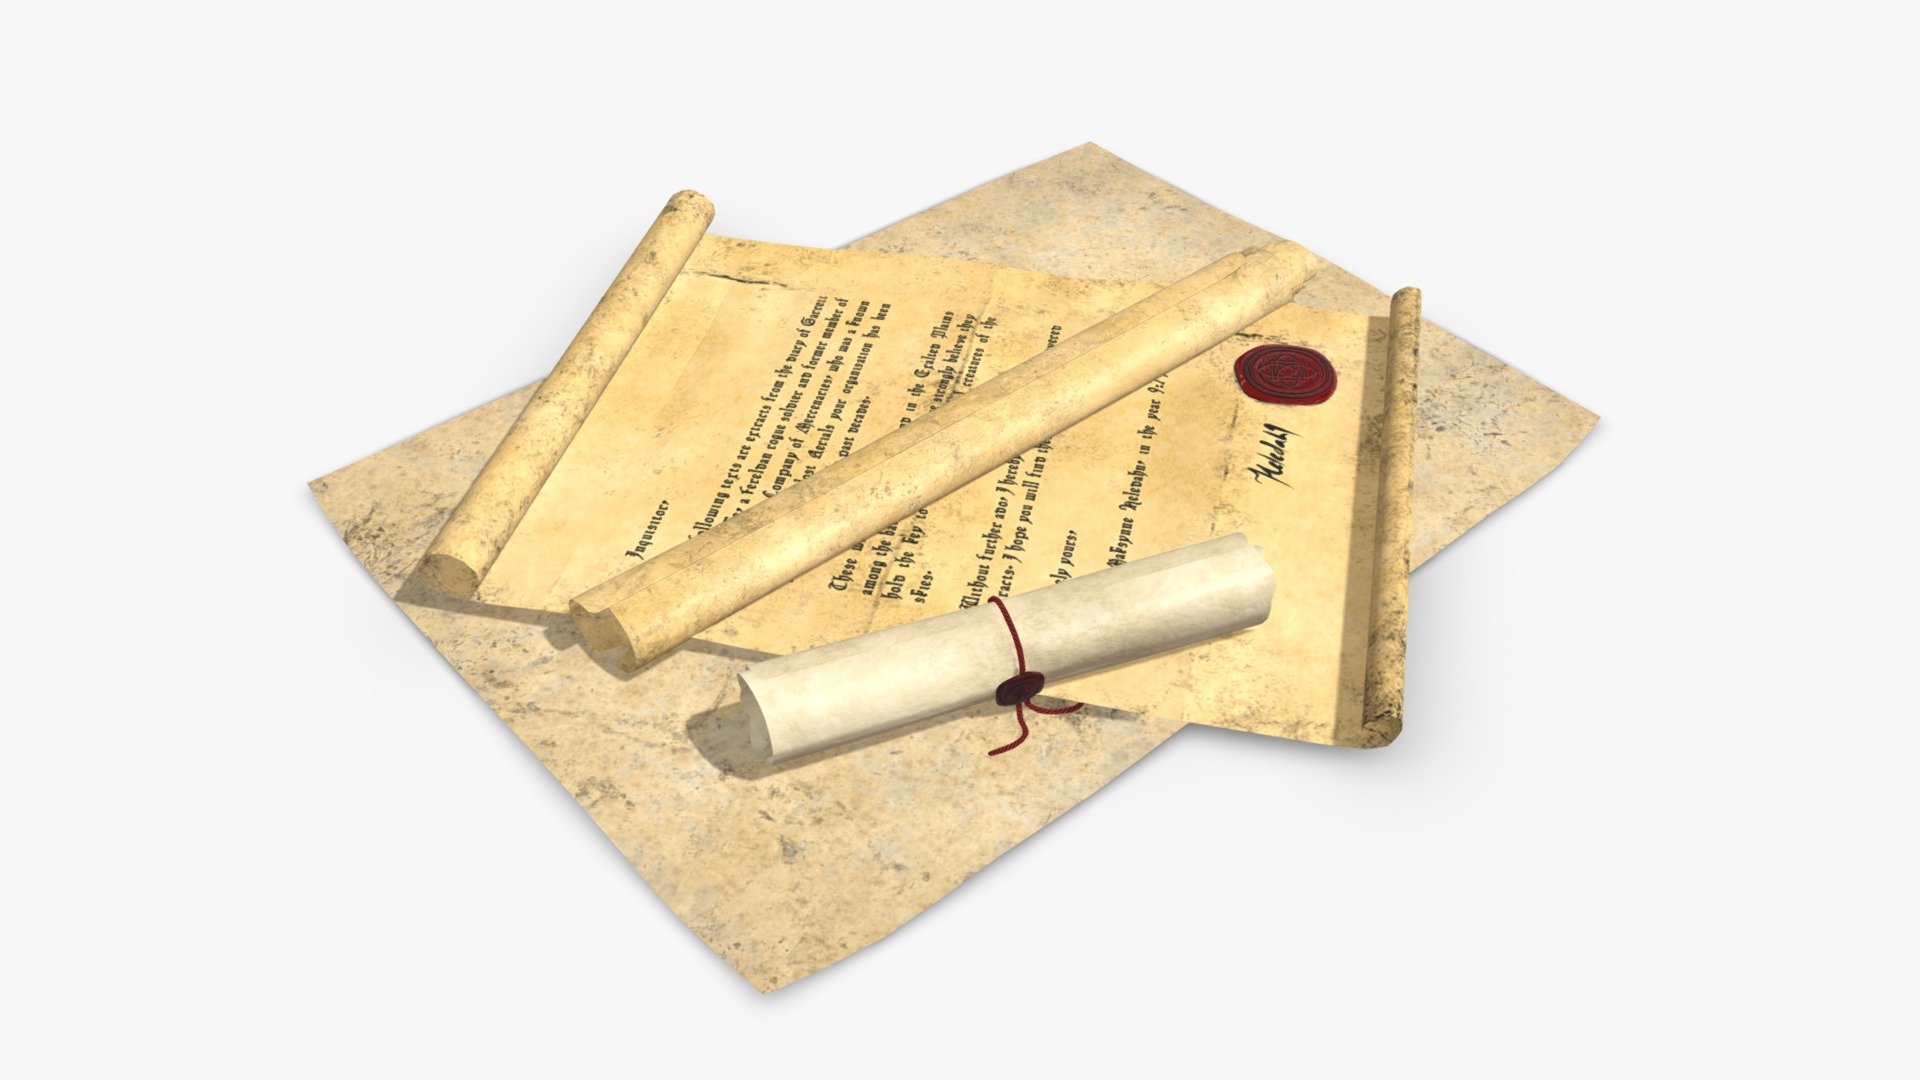 Check out my website for more products and better deals! &amp;gt;&amp;gt; SM5 by Heledahn &amp;lt;&amp;lt;

These are a digital 3D model collection of Old parchments, made of parchment paper and burned papyrus. Some of the parchments have been folded and have tears in the folded edges. Others have burnt corners and holes.

These models offer a charming antique look, perfect for Medieval, Fantasy or Steampunk settings, either as a background props, or as a closeup props due to their incredible amount of detail and realism.

This product will achieve realistic results in your rendering projects and animations, being greatly suited for close-ups due to their high quality topology and PBR shading 3d model